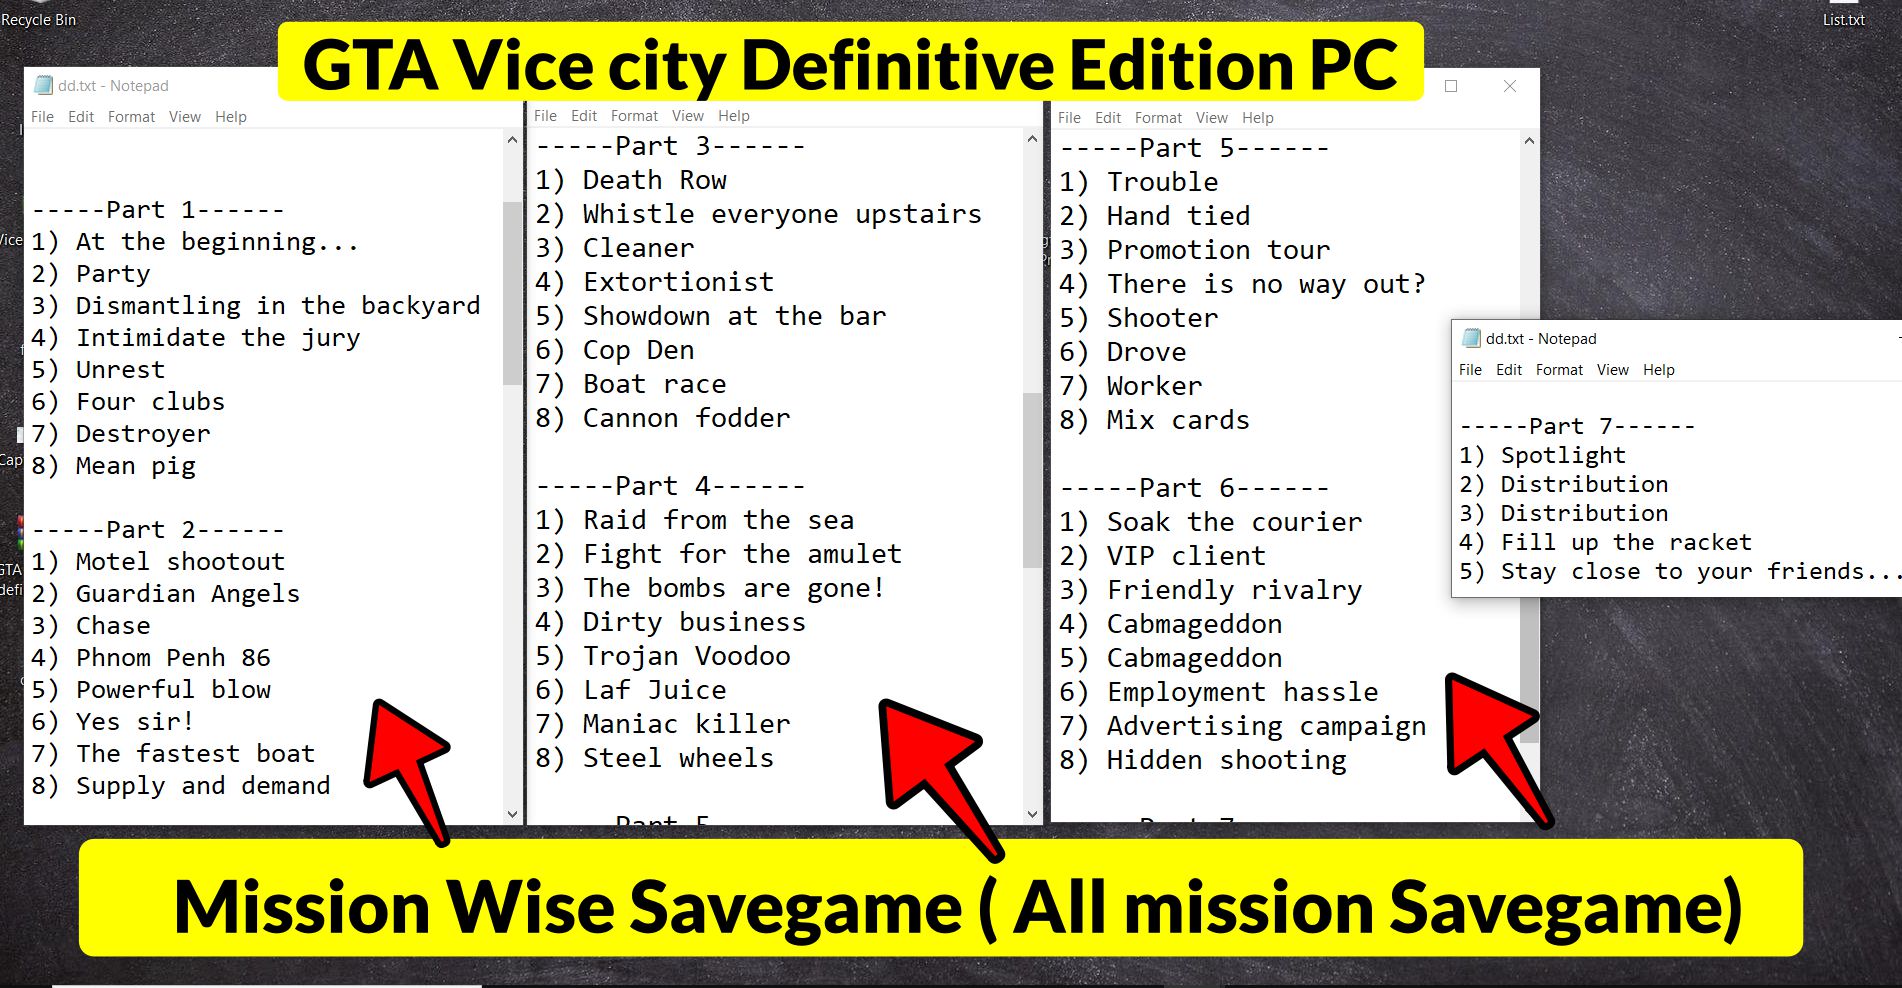 GTA Vice City definitive edition PC - All missions savegame